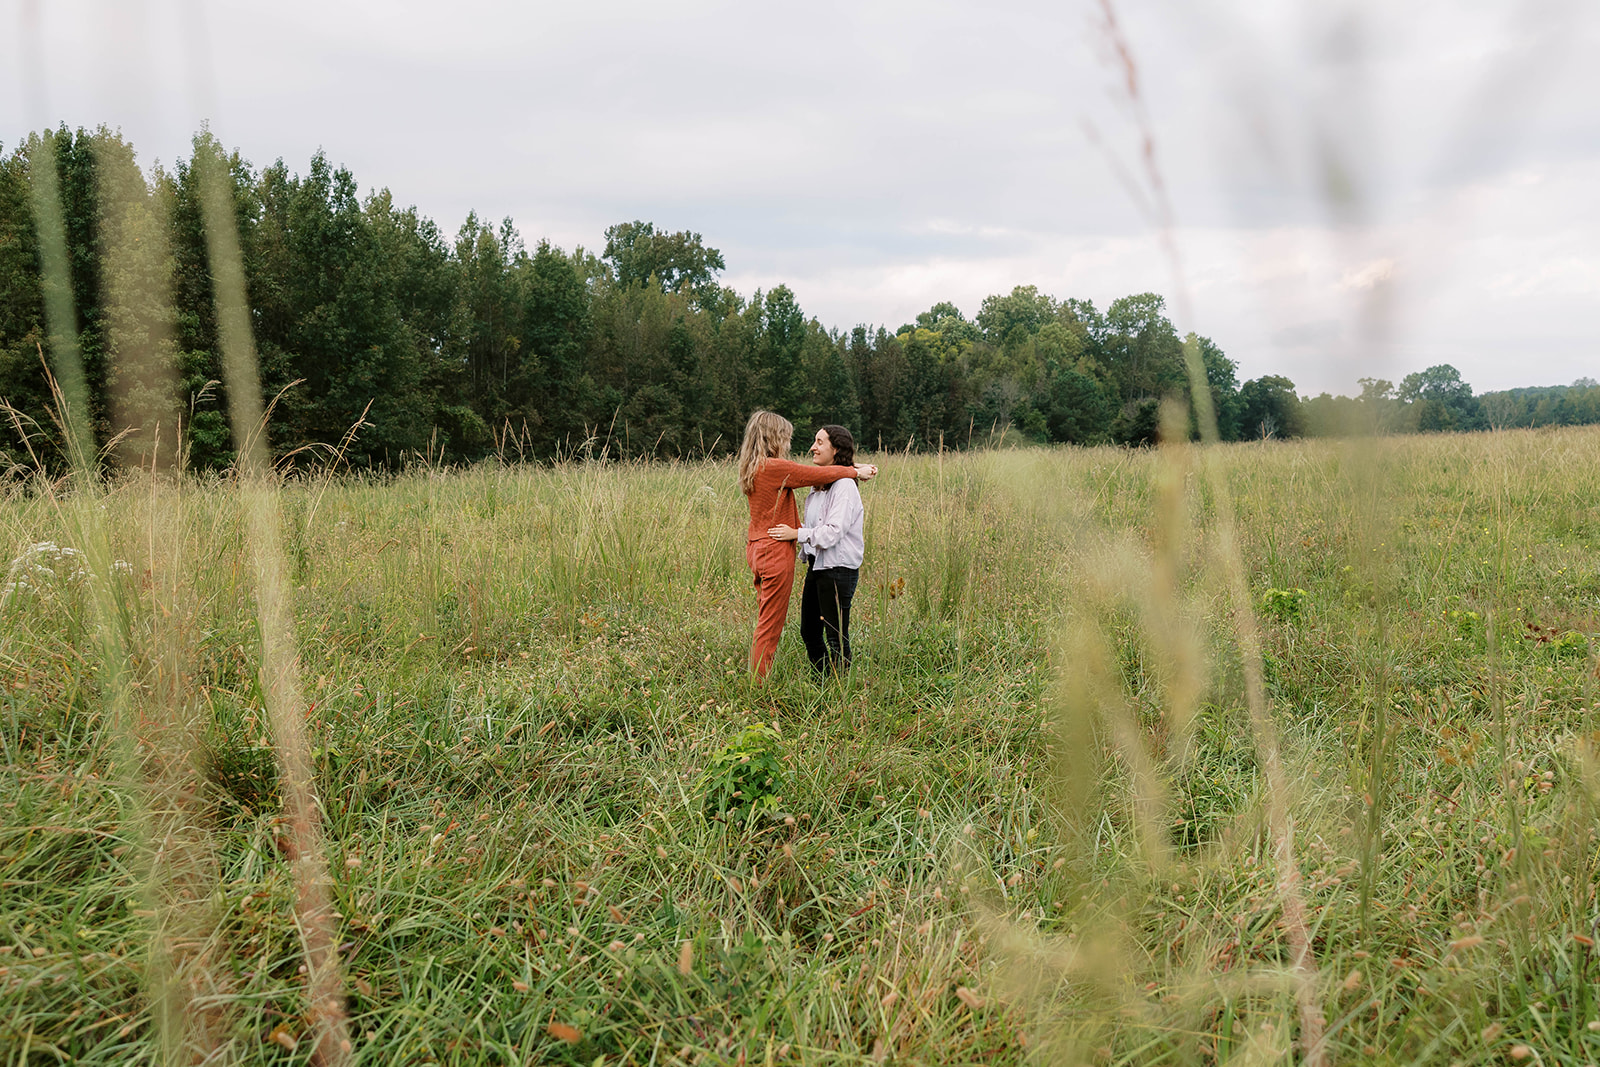 Atlanta LGBTQ+ engagement session with two lesbians holding each other in a filed. Both are wearing casual outfits and they have their arms wrapped around each other.